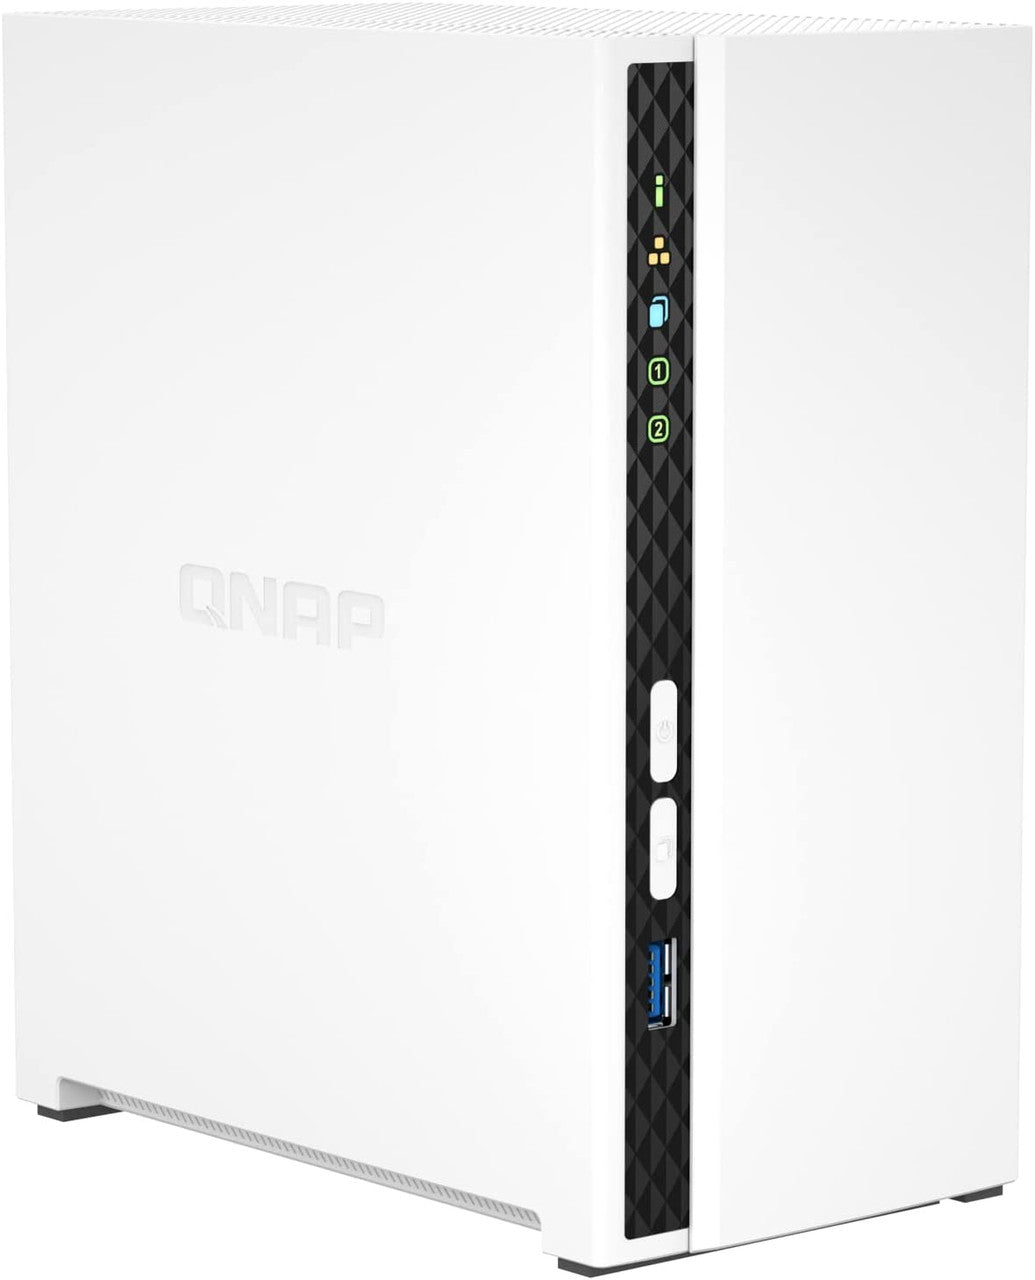 QNAP TS-233 2-Bay Desktop NAS with a 12TB (2 x 6TB) of Western Digital Red Plus Drives Fully Assembled and Tested